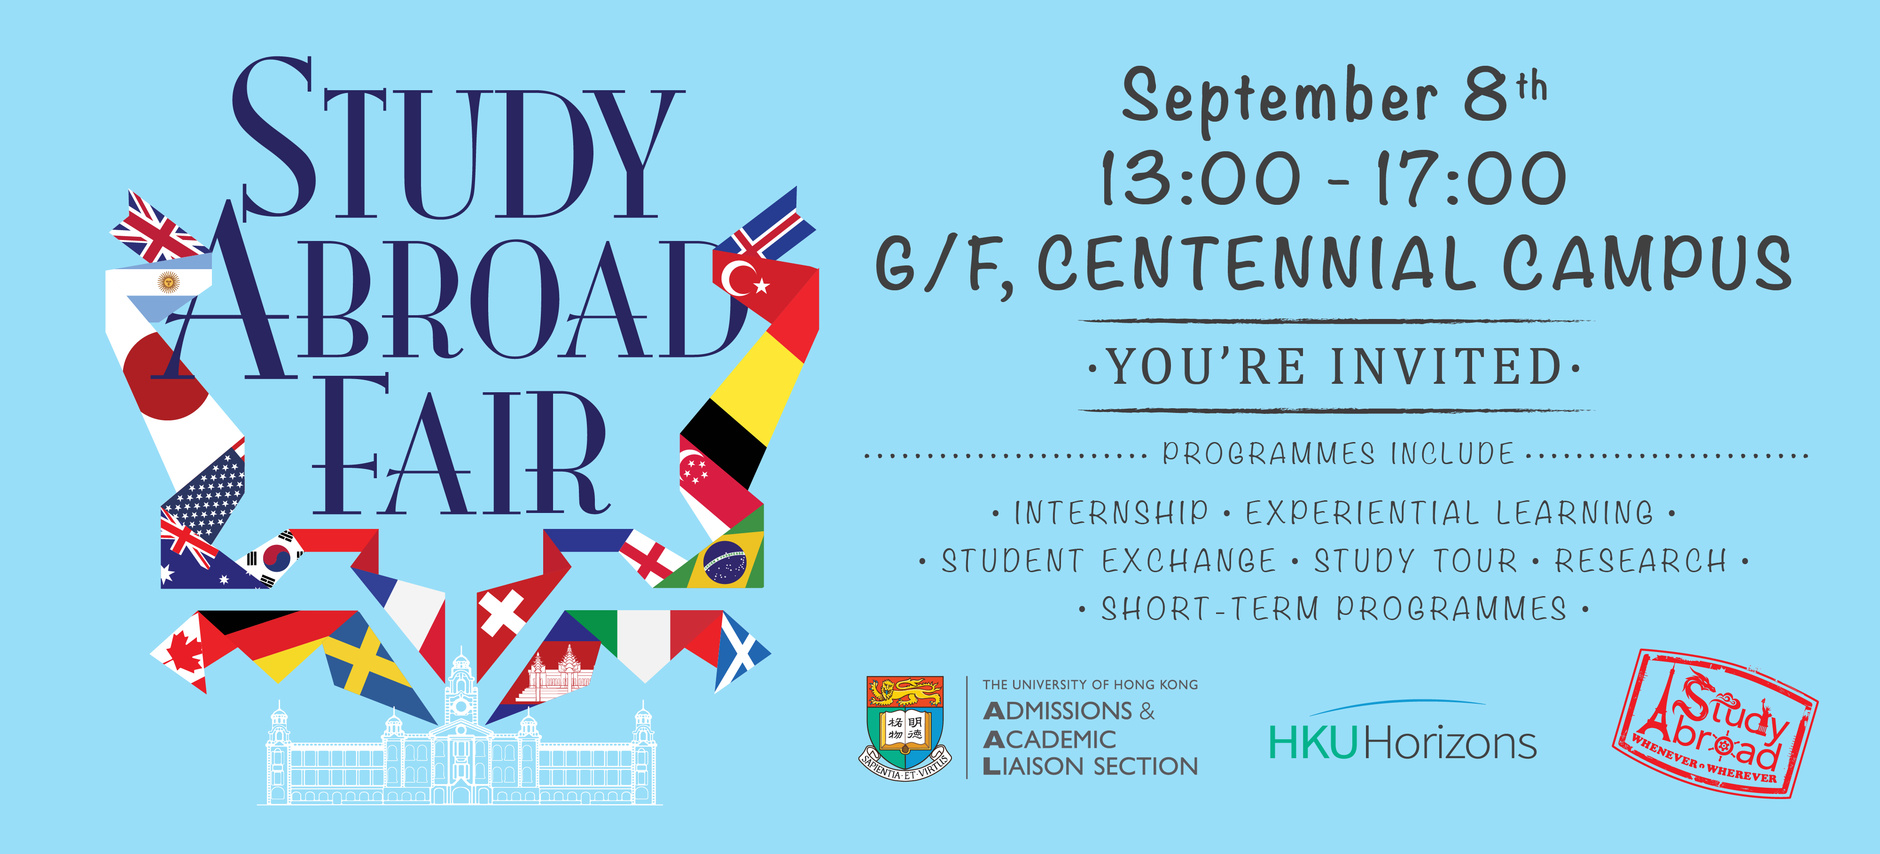 You are invited to join us at the Study Abroad Fair on September 8th!